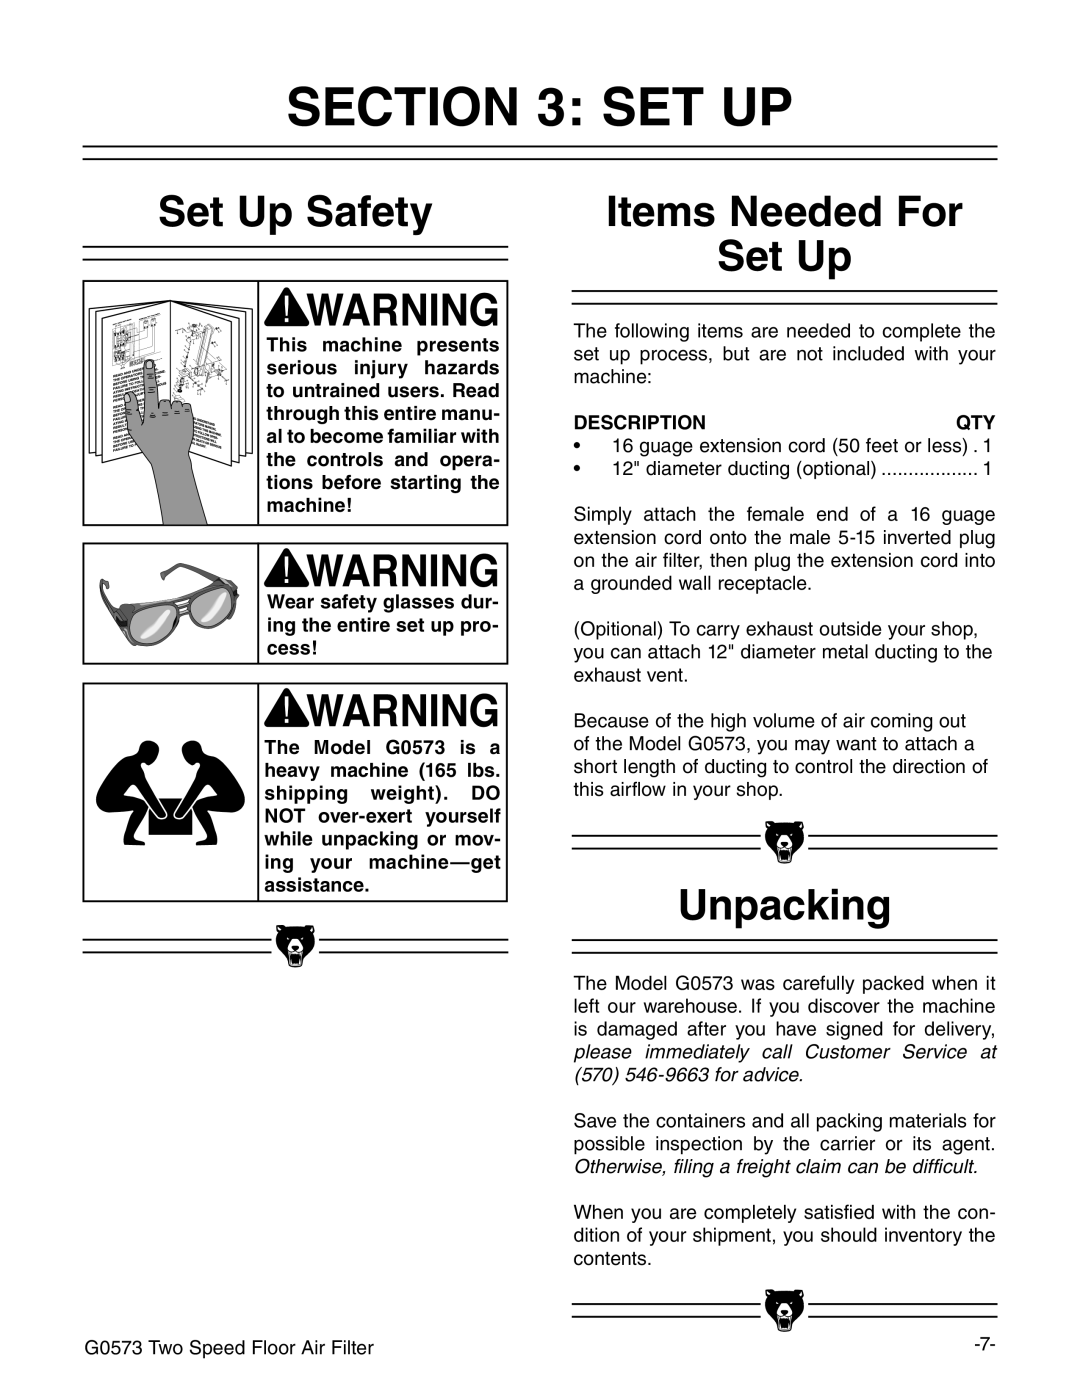 Grizzly G0573 instruction manual Set Up Safety, Items Needed For Set Up, Unpacking 